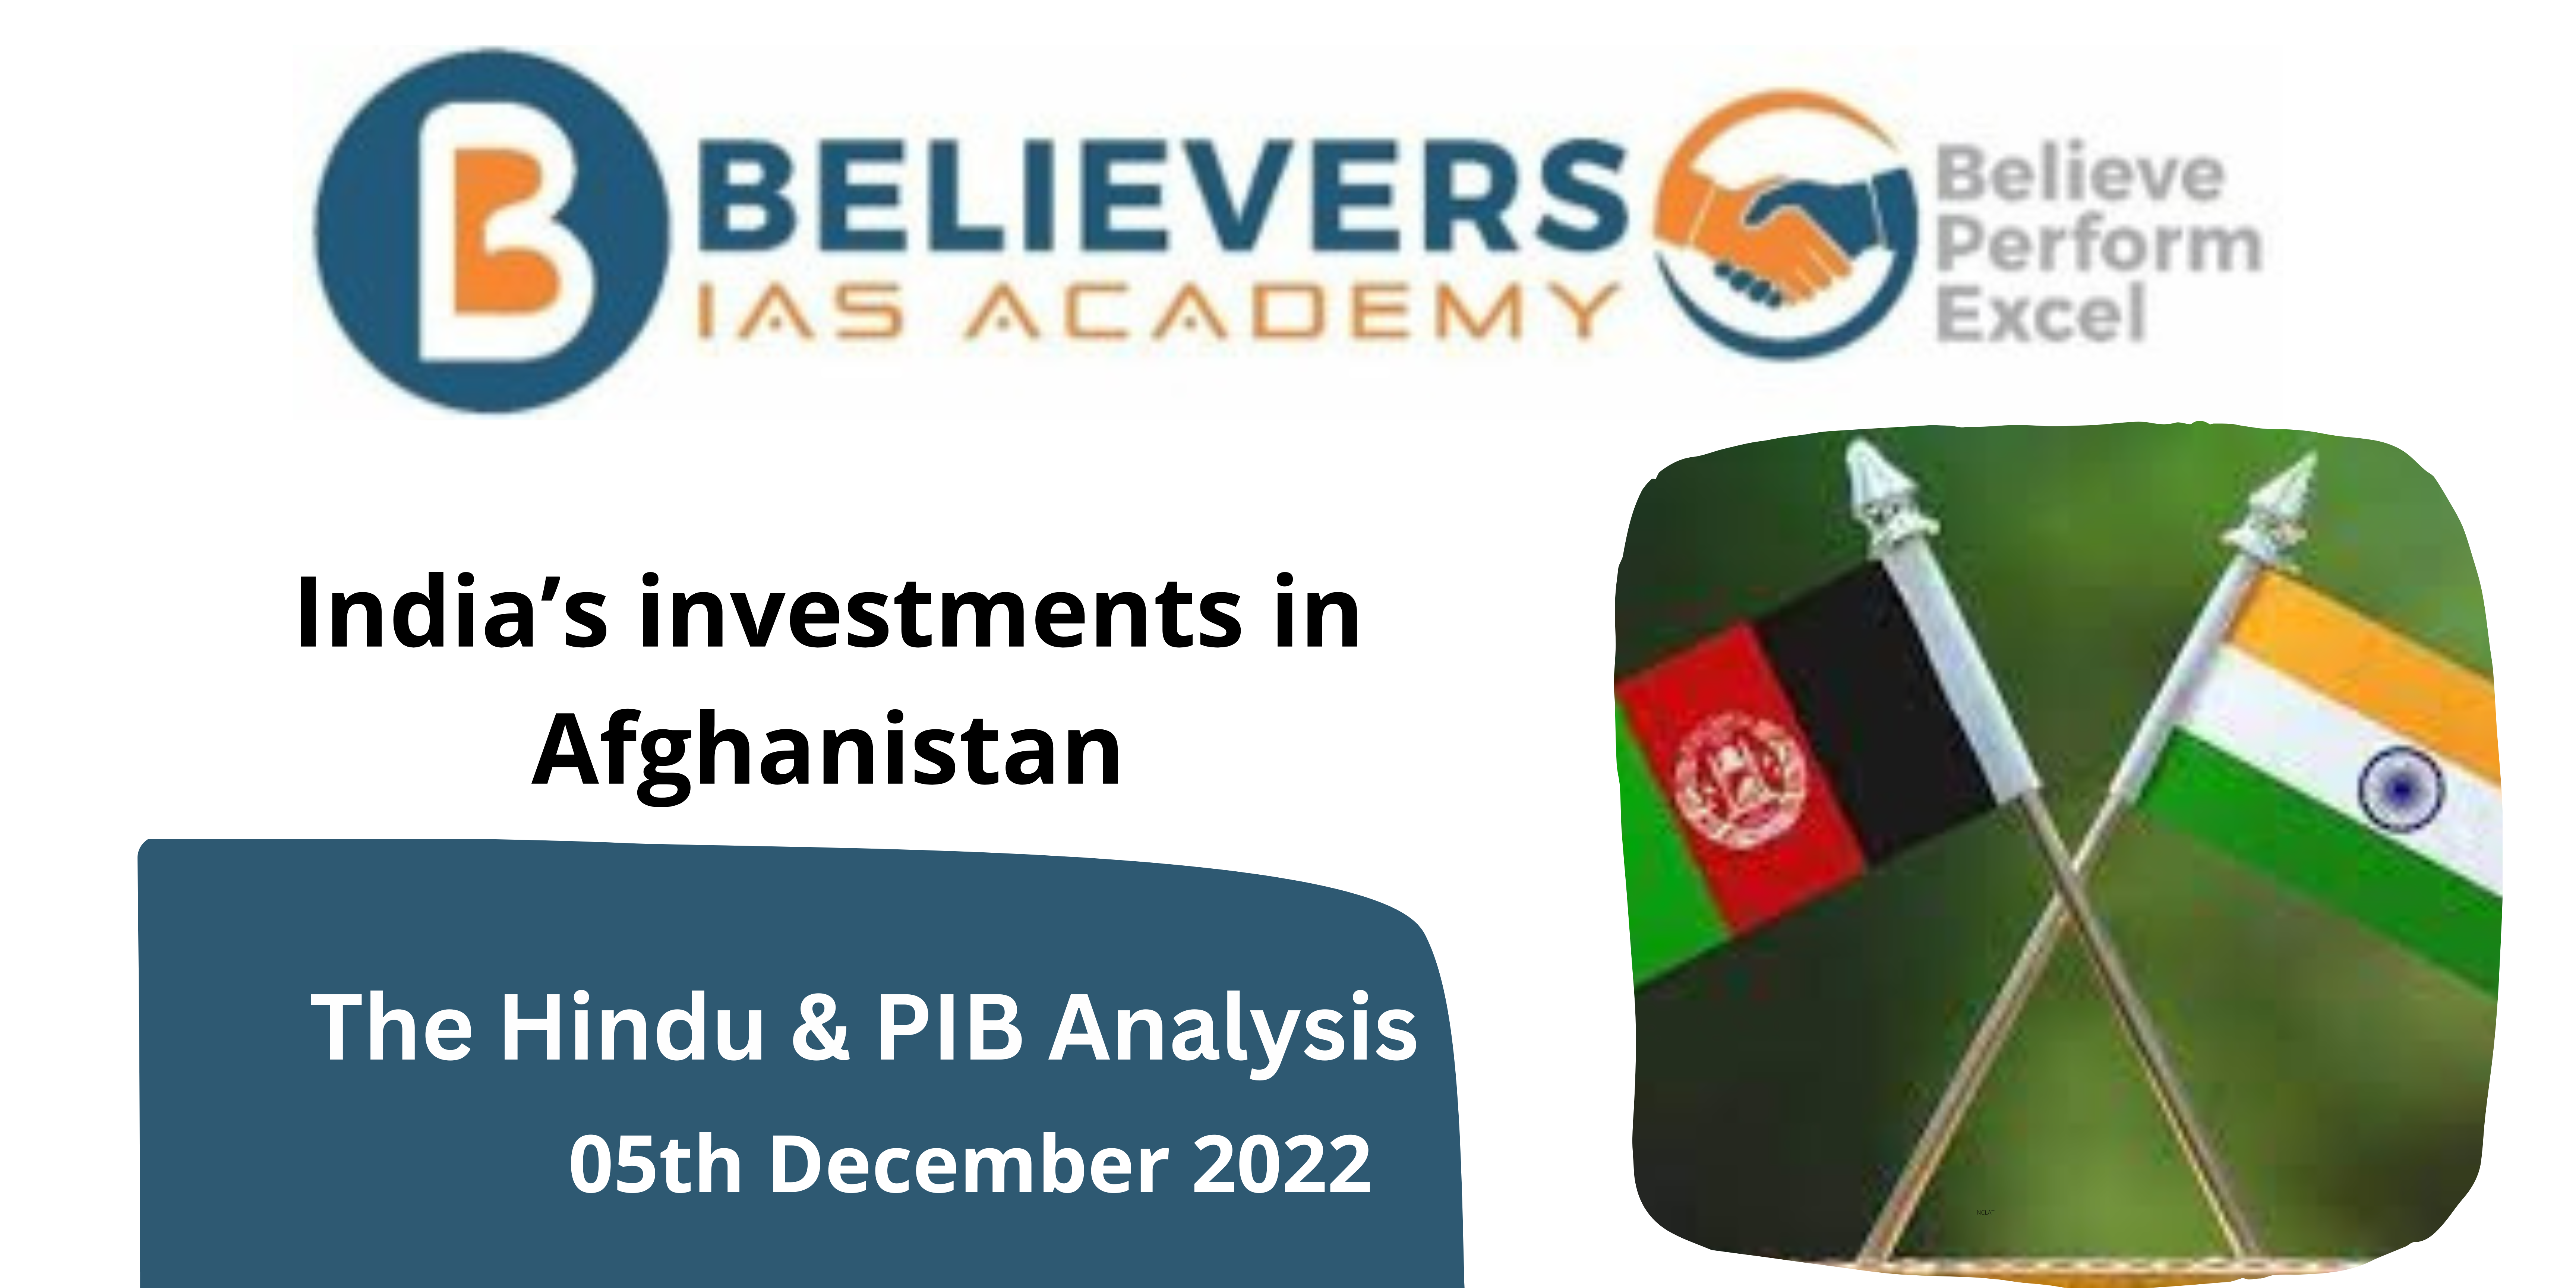 India’s investments in Afghanistan